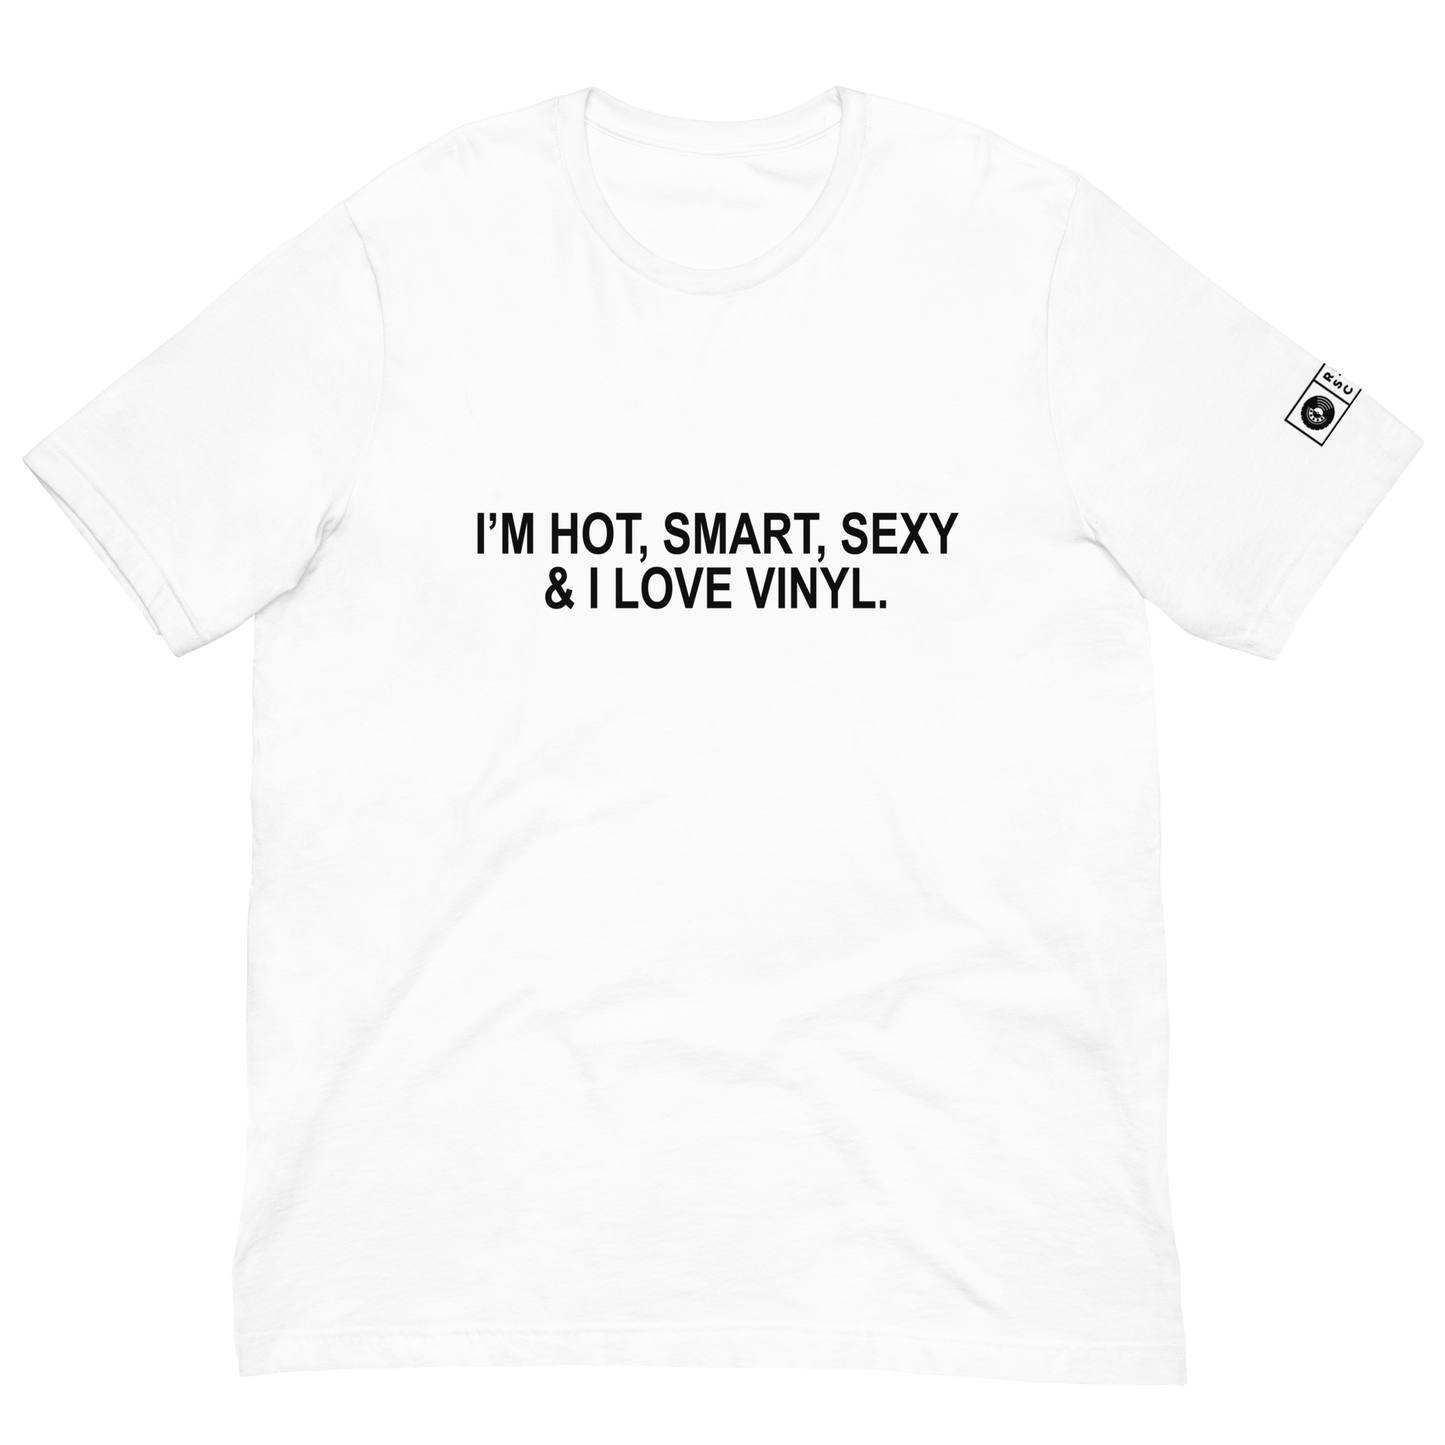 The Hottest, Smartest, Sexiest Tee